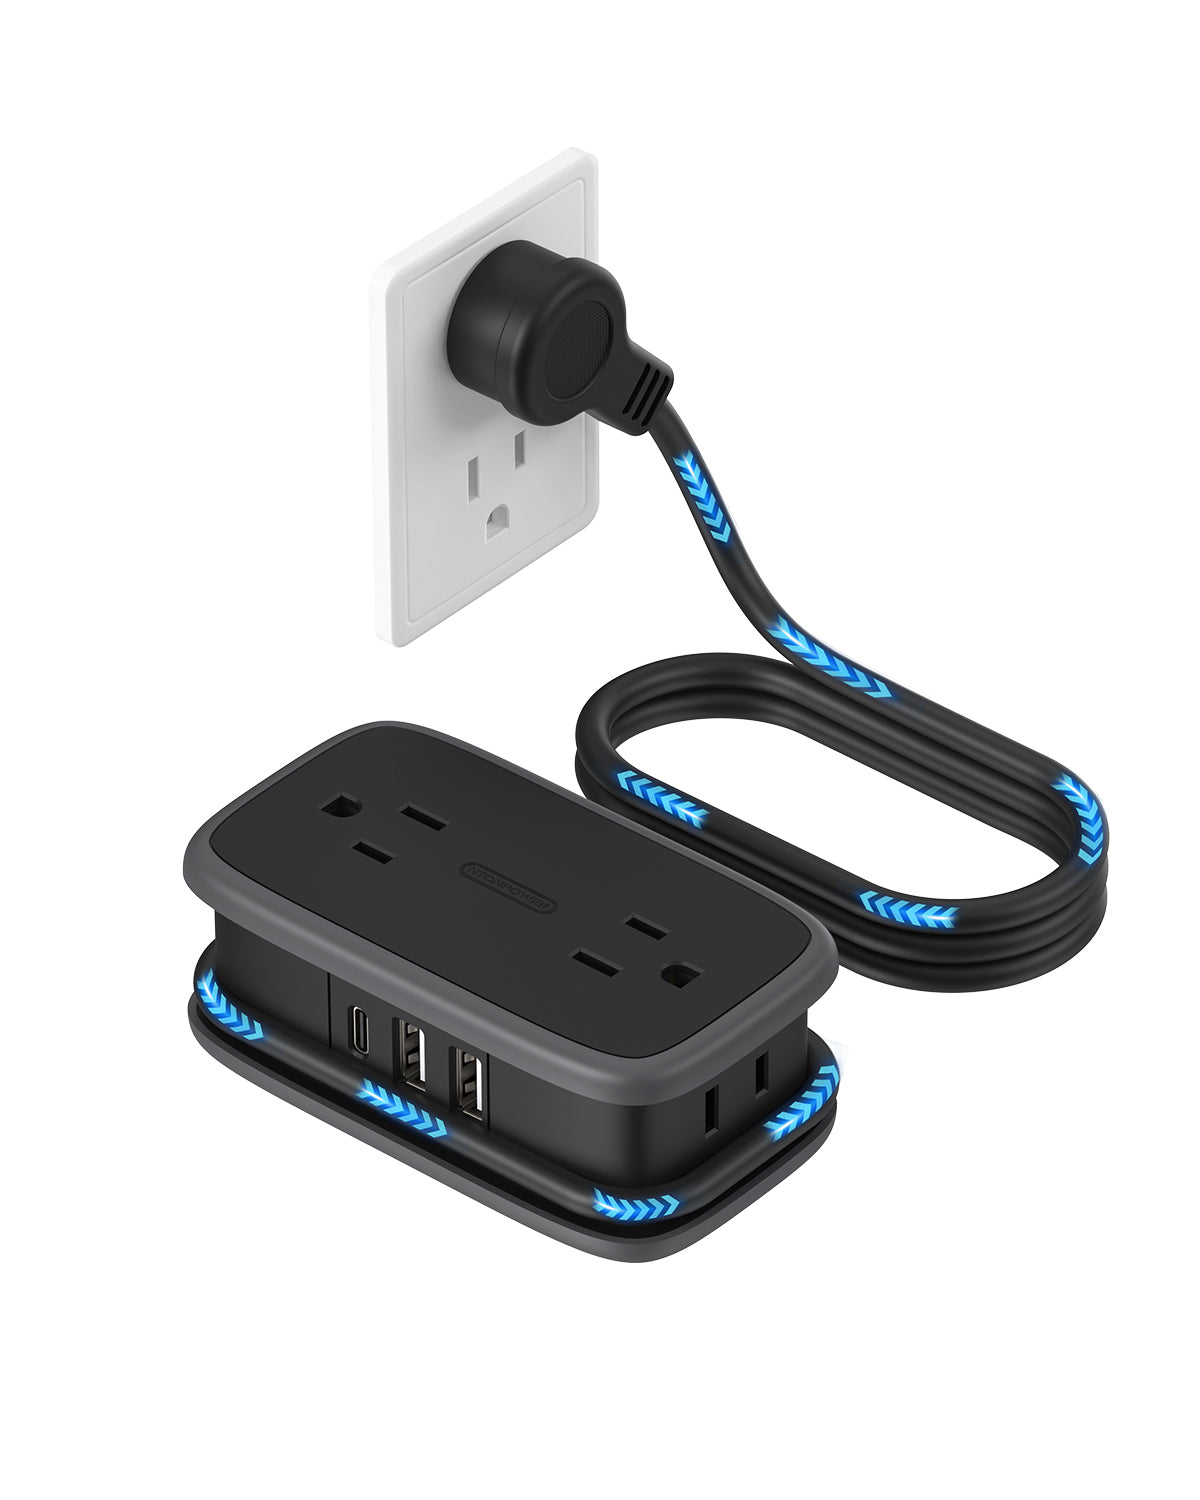 Ntonpower Pocket Power Strip 4 Outlets 2 USB Ports